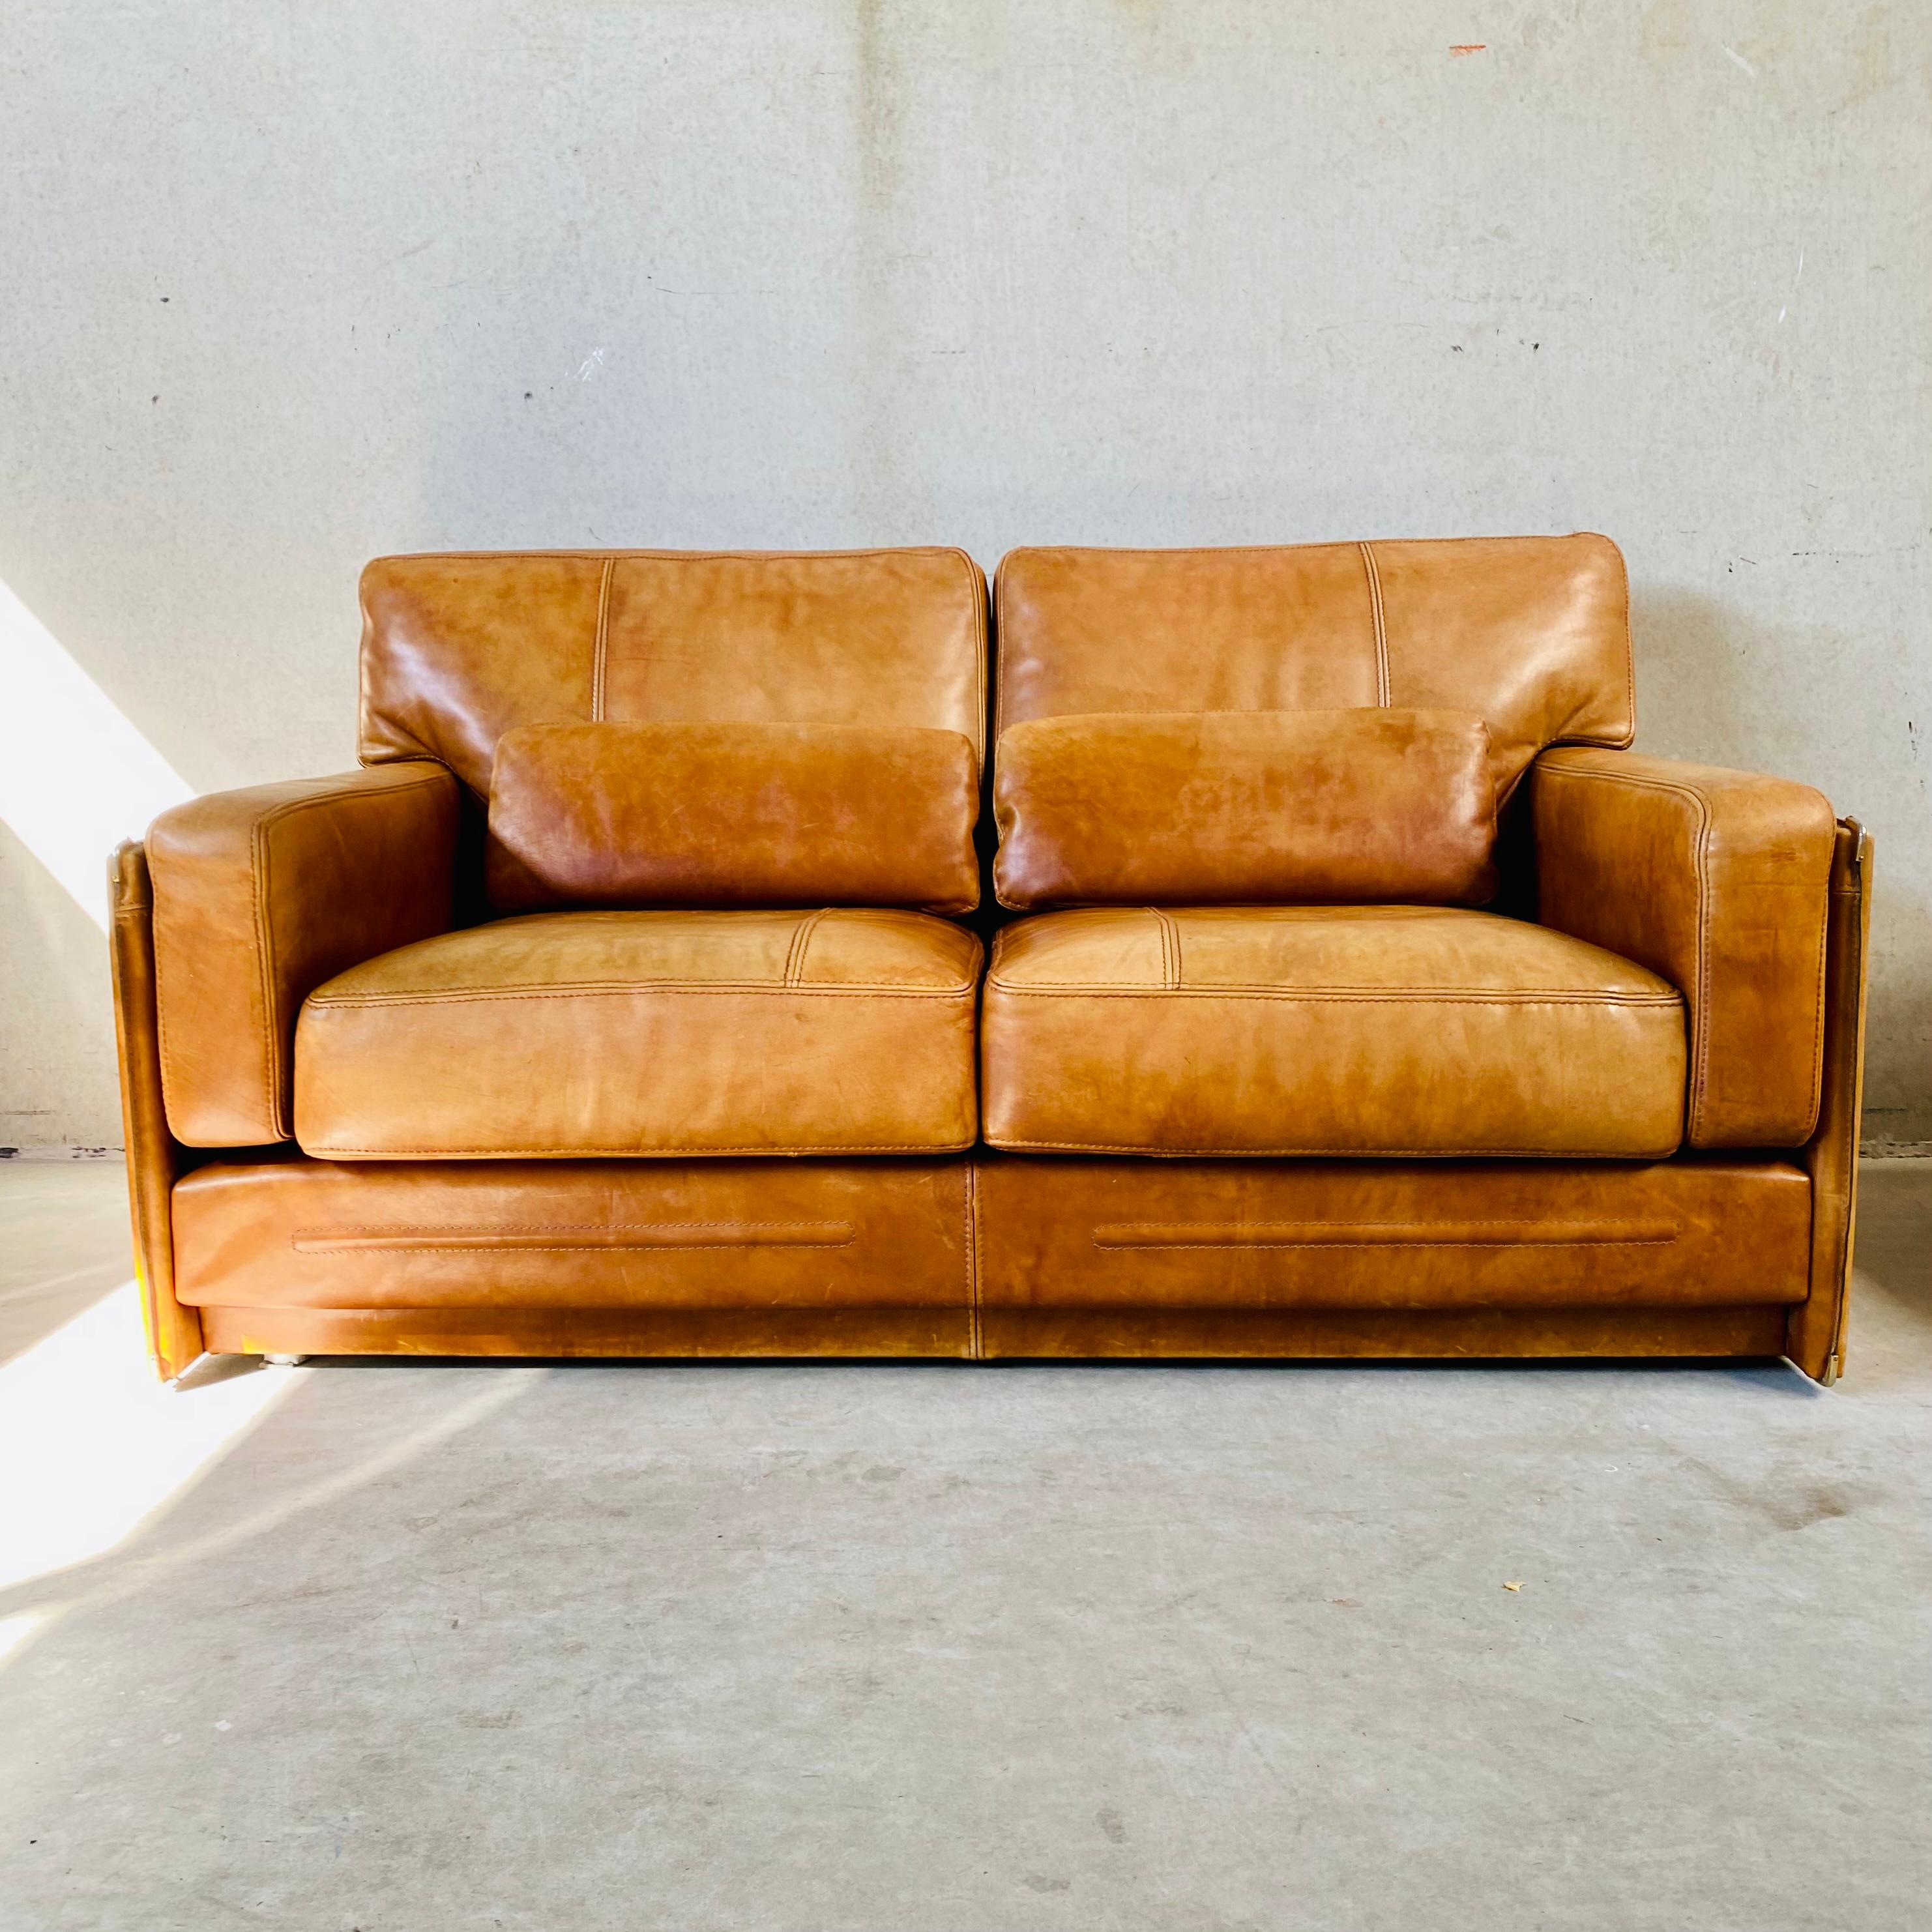 Mid-Century Modern Cognac Leather 2-Seater Sofa by MarCo Milisich for Baxter, Italy, 1970 For Sale